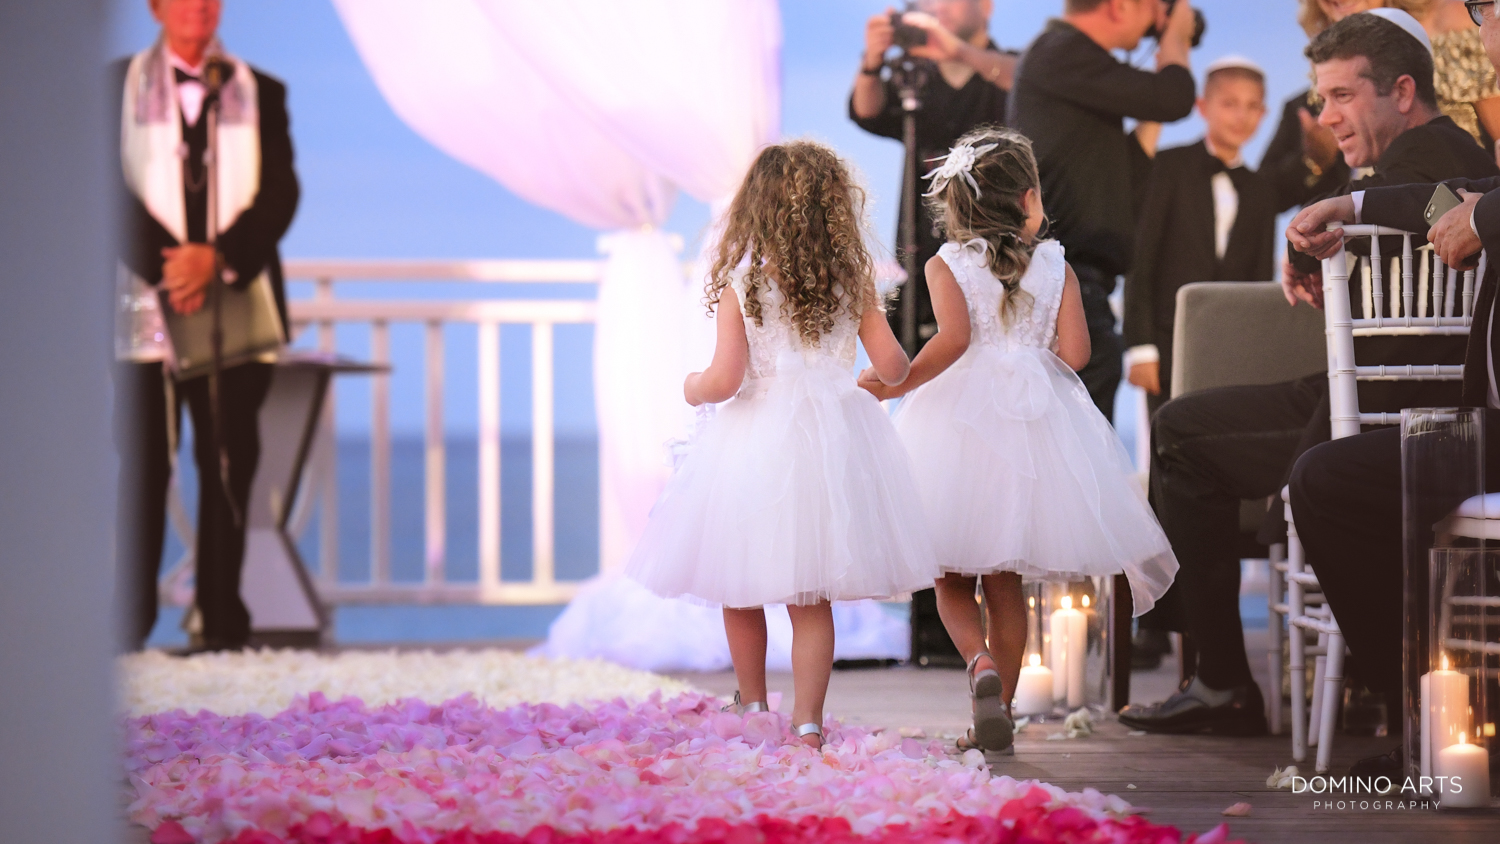 Wedding ceremony décor pictures at One&Only Ocean Club Bahamas